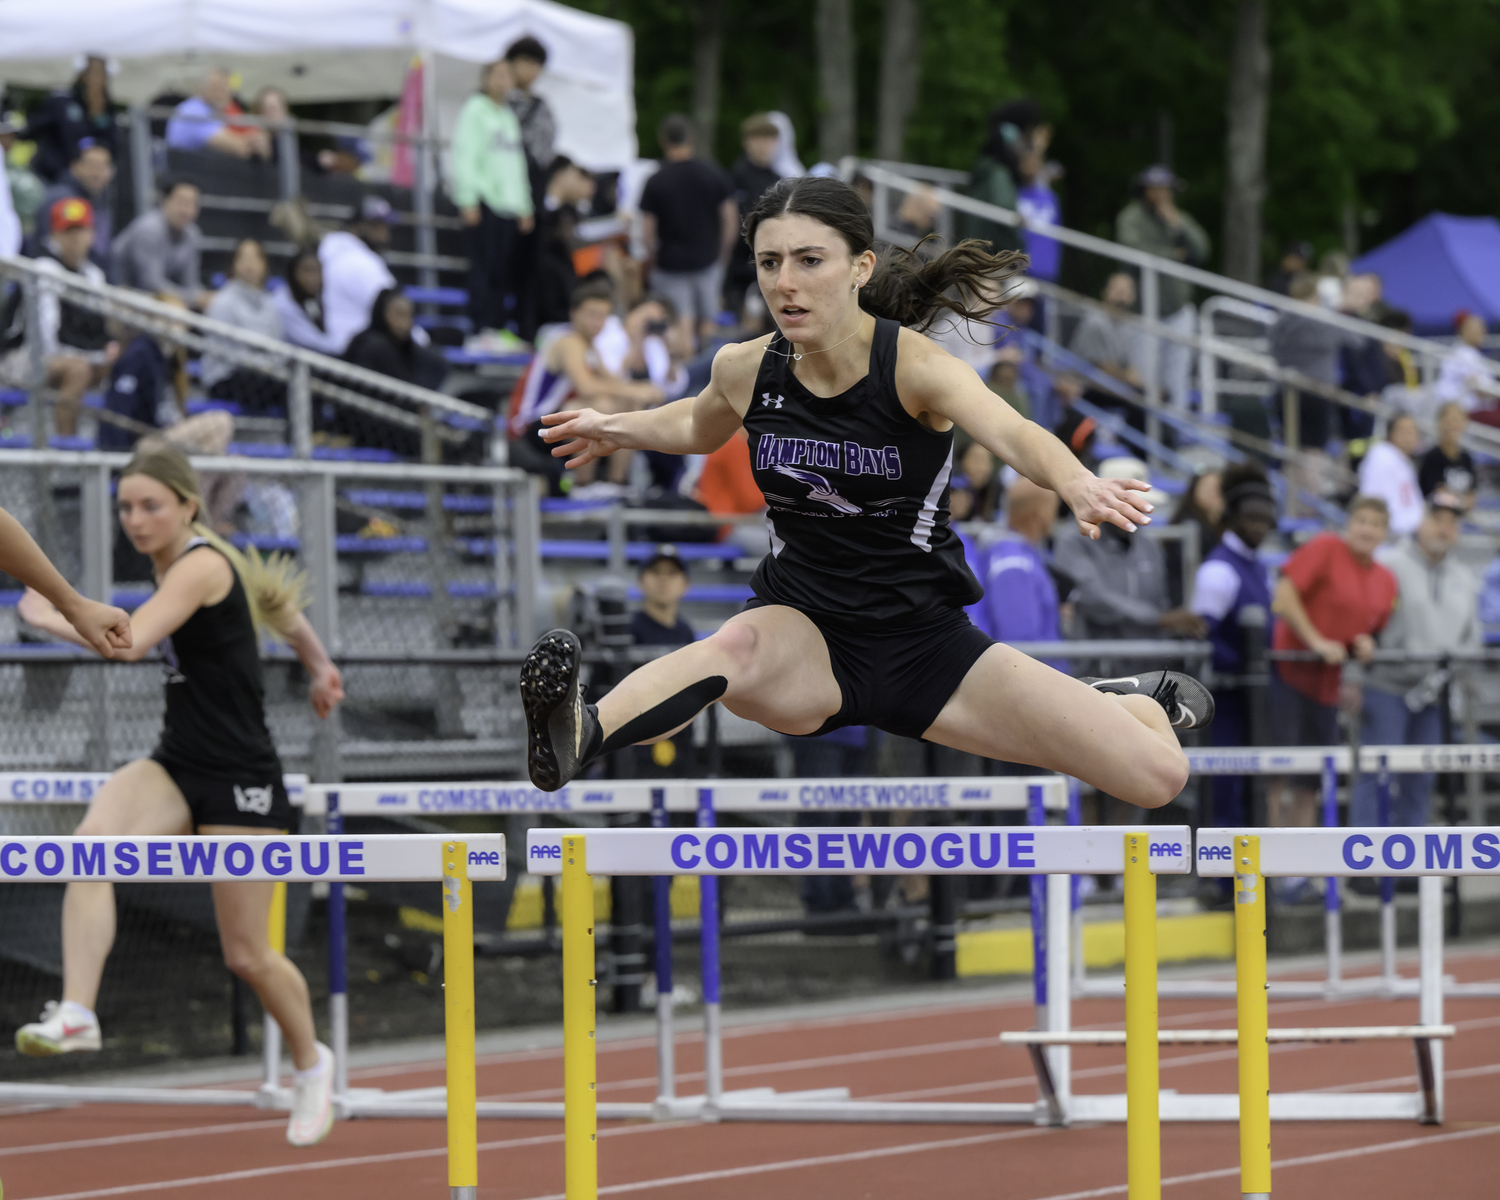 Hampton Bays senior Emma Halsey once again qualified for states in the 100-meter hurdles.   MARIANNE BARNETT